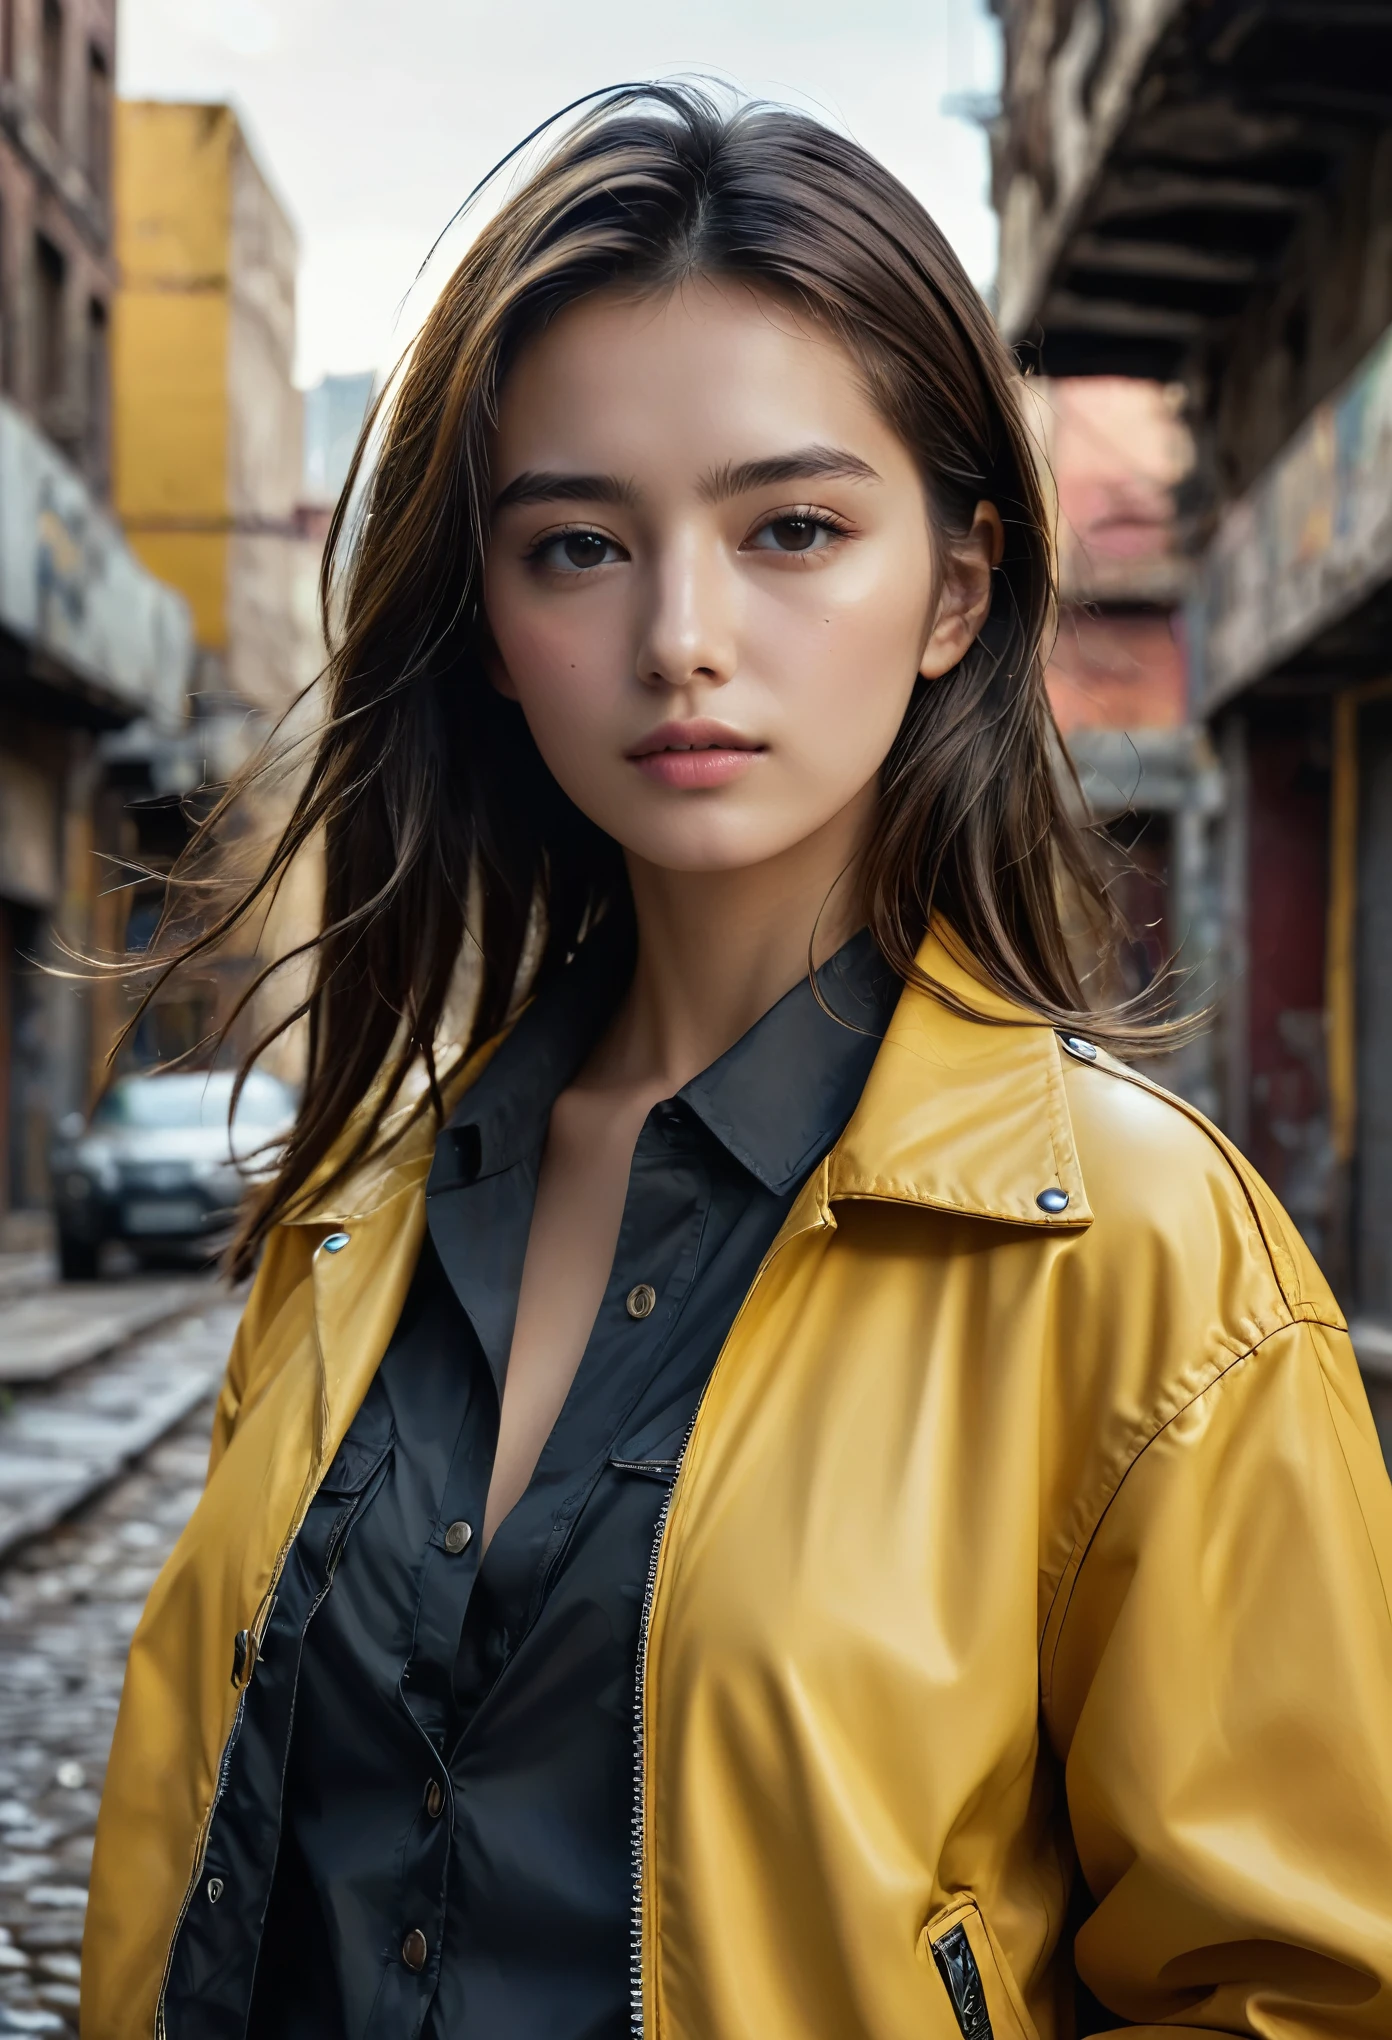 (best quality,4k,8k,highres,masterpiece:1.2),ultra-detailed,(Ultra-realistic, photorealistic,photo-realistic:1.37), RAW Photos, Close-up portrait of a 20-year-old.o One beautiful girl, the most beautiful, alone, Realistic, shirt, Jacket, cyber punk, Brown Hair, yellow Jacket, background is city ruins, (Skin with attention to detail:1.2), 8K Ultra HD, Digital SLR, Soft lighting, high quality, Film Grain, Fujifilm XT3, Highly detailed background